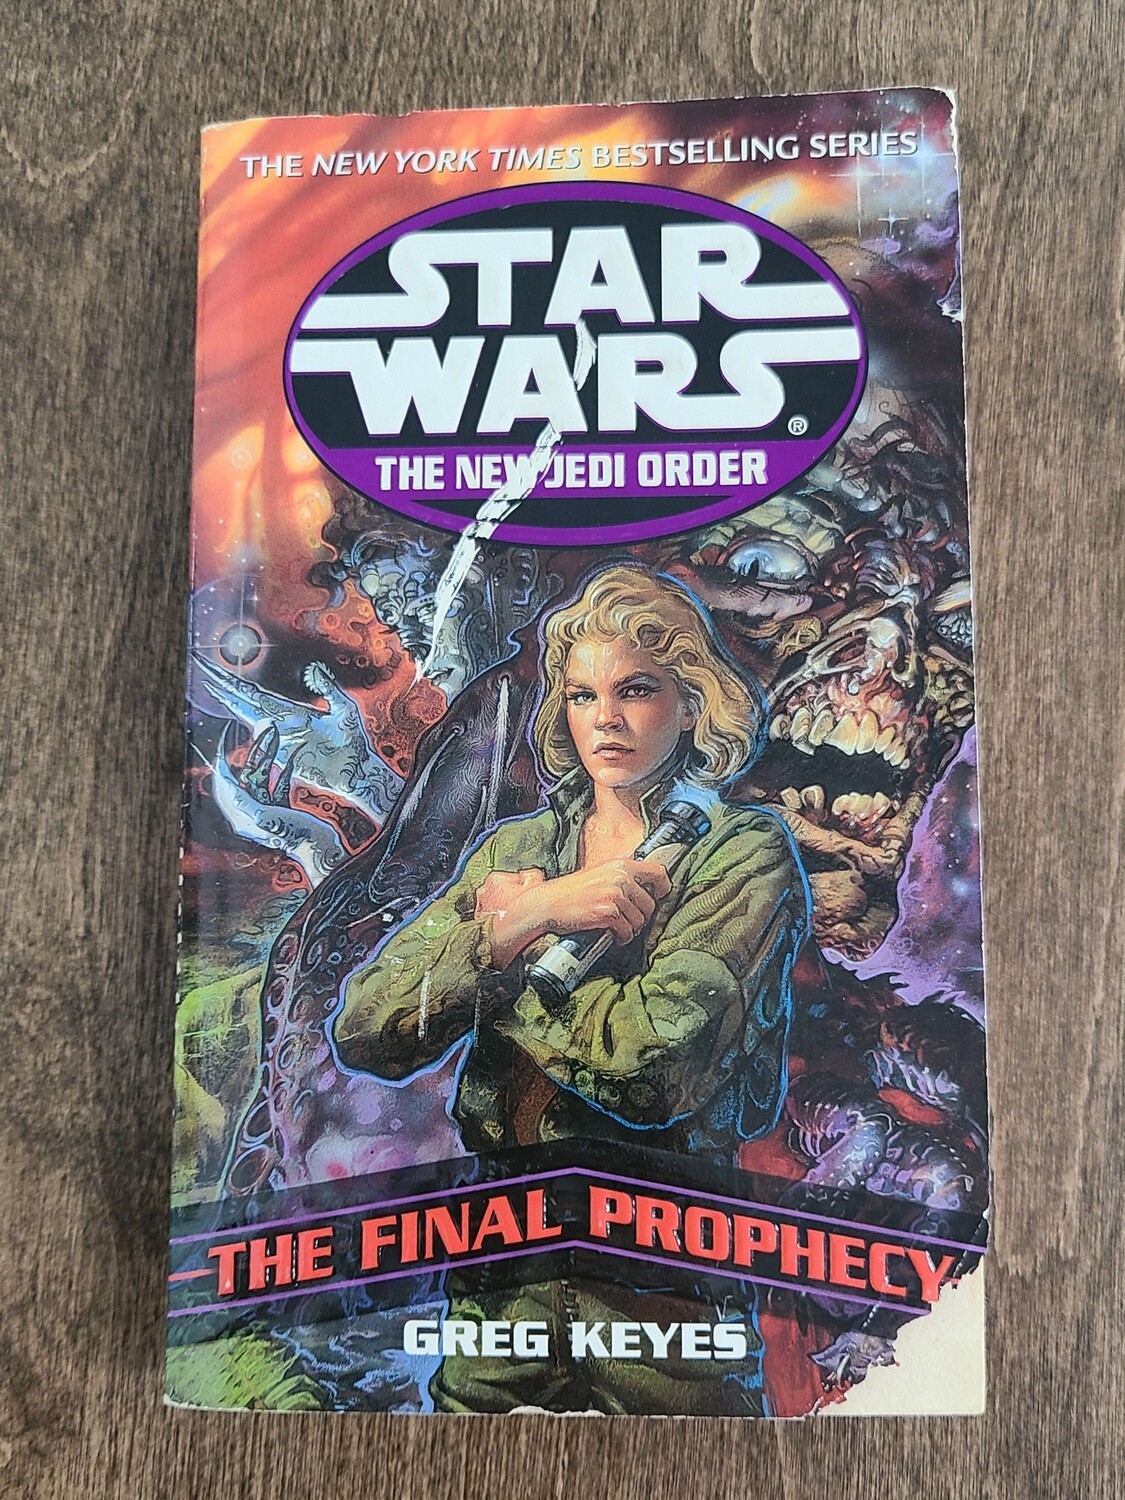 Star Wars: The New Jedi Order - The Final Prophecy by Greg Keyes